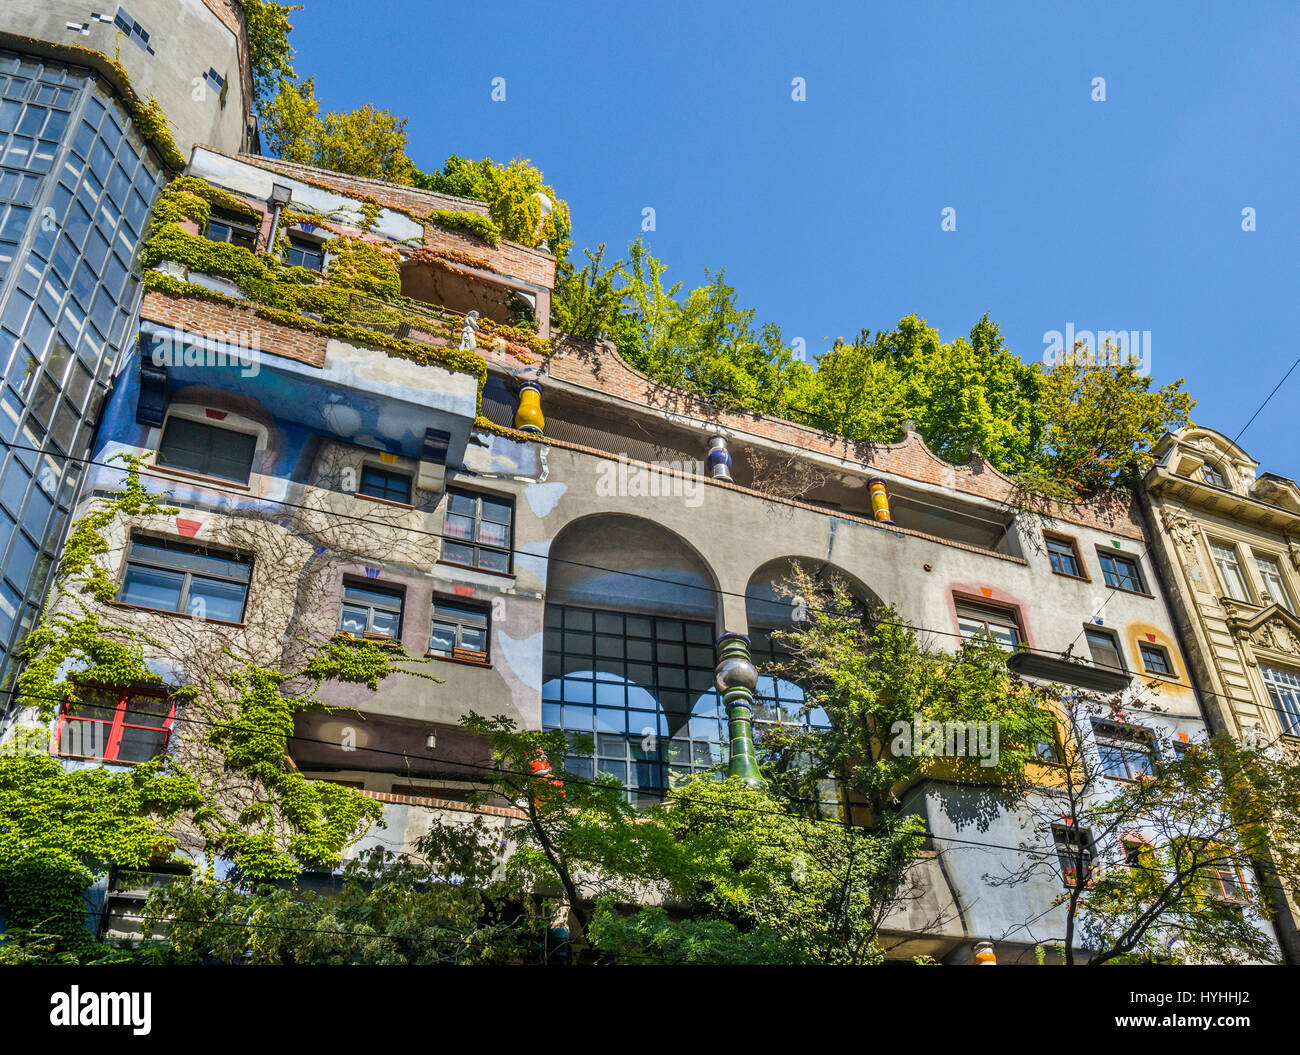 Austria, Vienna, Landstraße District, view of the Hundertwasserhaus, a public housing apartment building with undulating floors, thas has become an ex Stock Photo